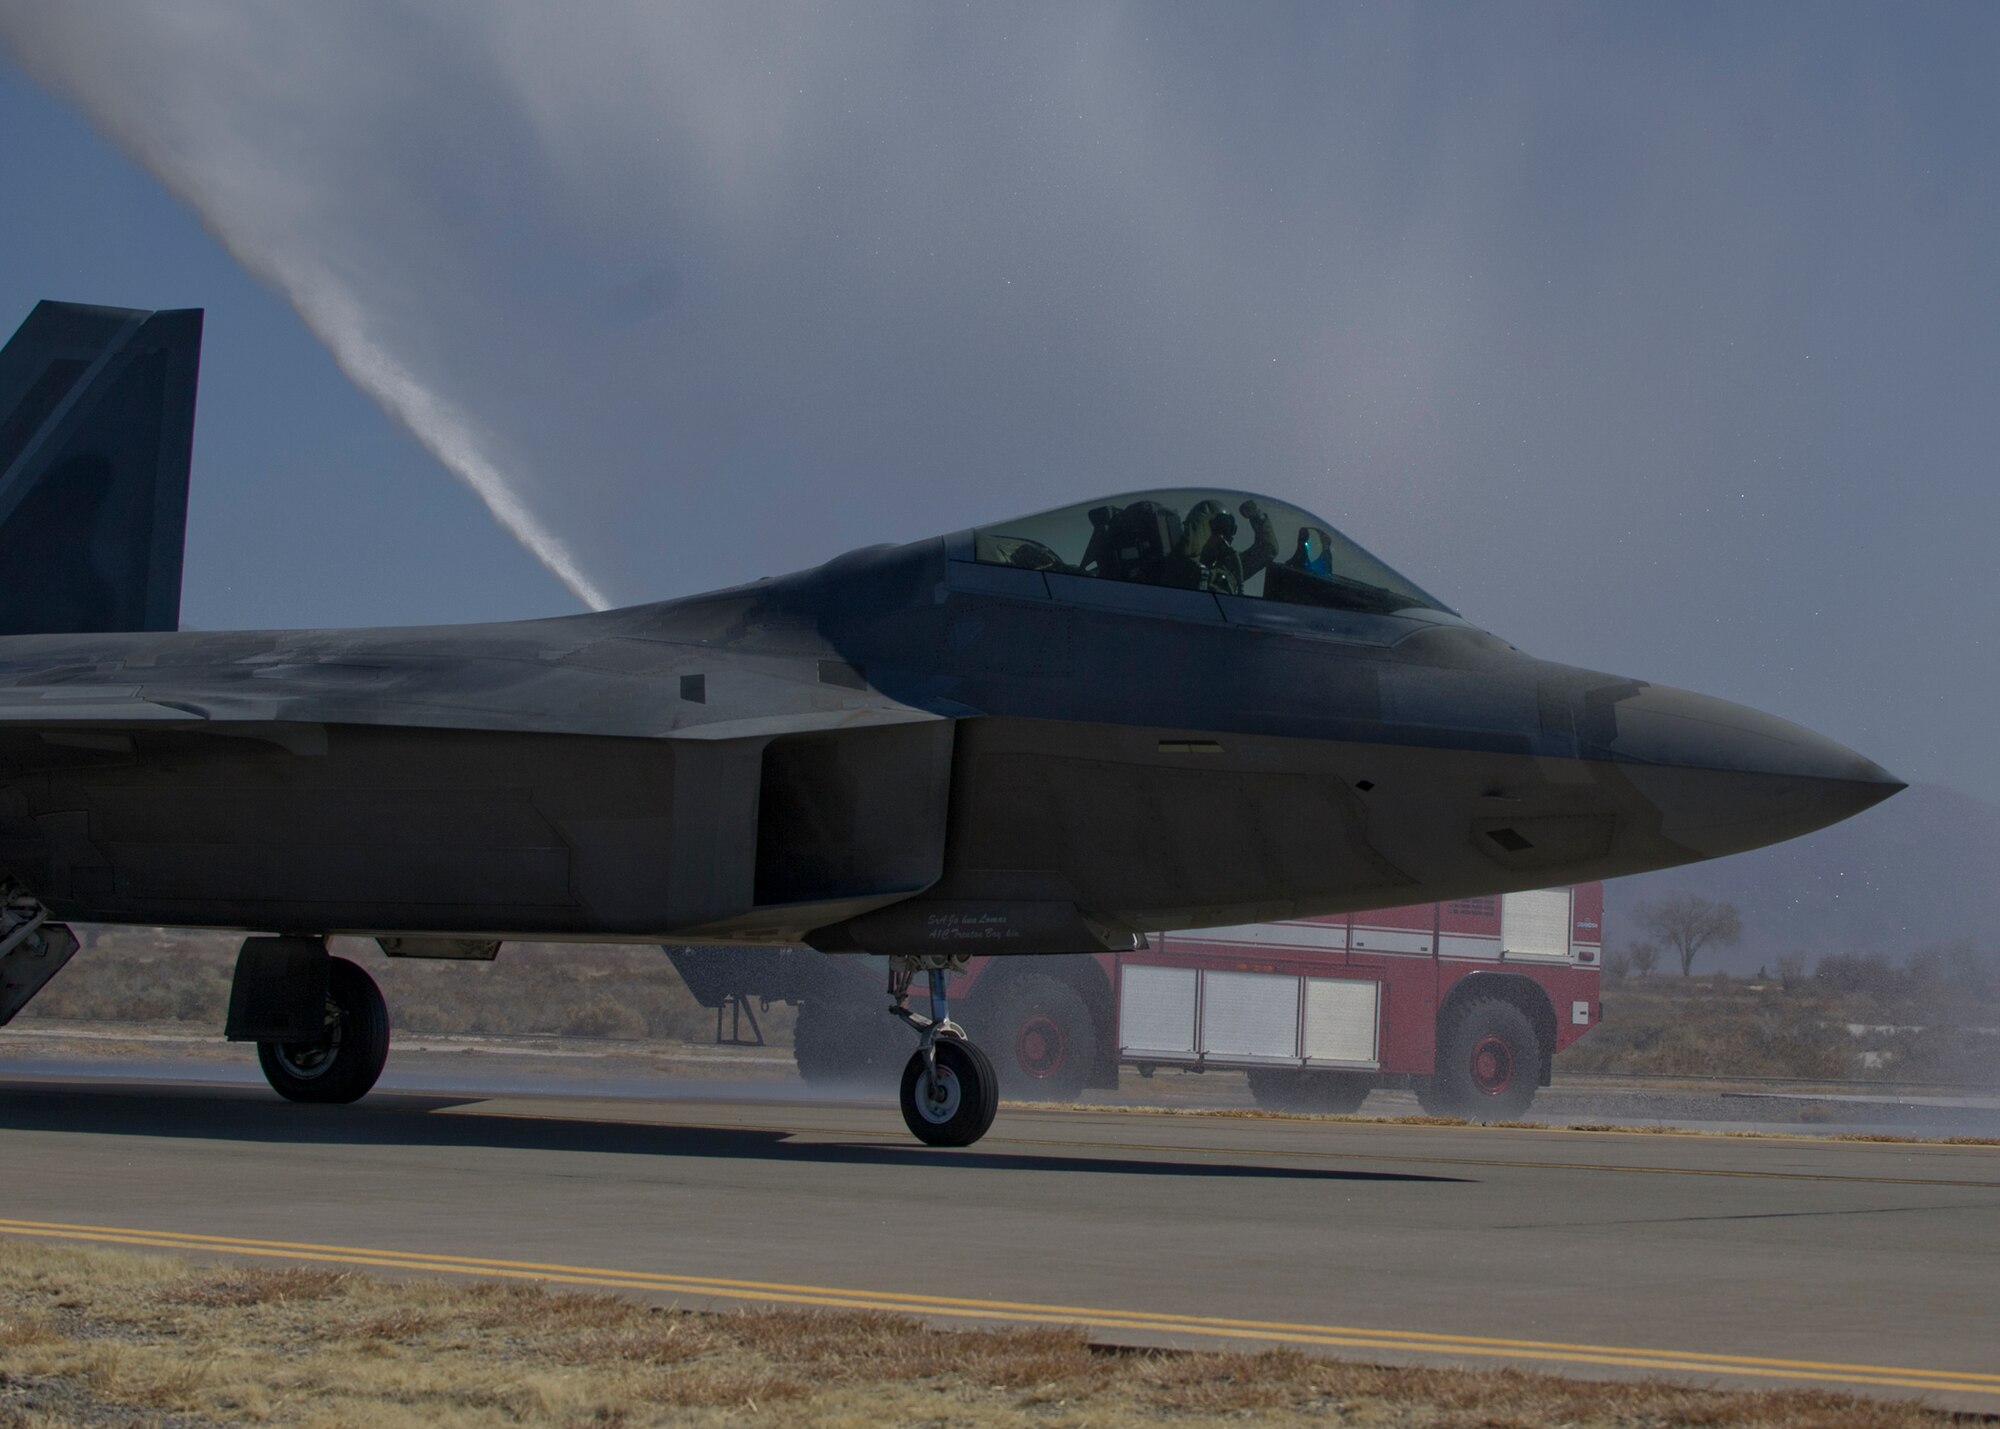 An F-22 Raptor taxis down the runway at Holloman Air Force Base N.M., after completing a formation flight over the city of Alamogordo N.M. Feb. 20. The 7th Fighter Squadron and members of the Holloman community celebrated this final sortie before the F-22s depart for Tyndall Air Force Base, Fla., in early April. (U.S. Air Force photo by Airman 1st Class Chase Cannon/Released)